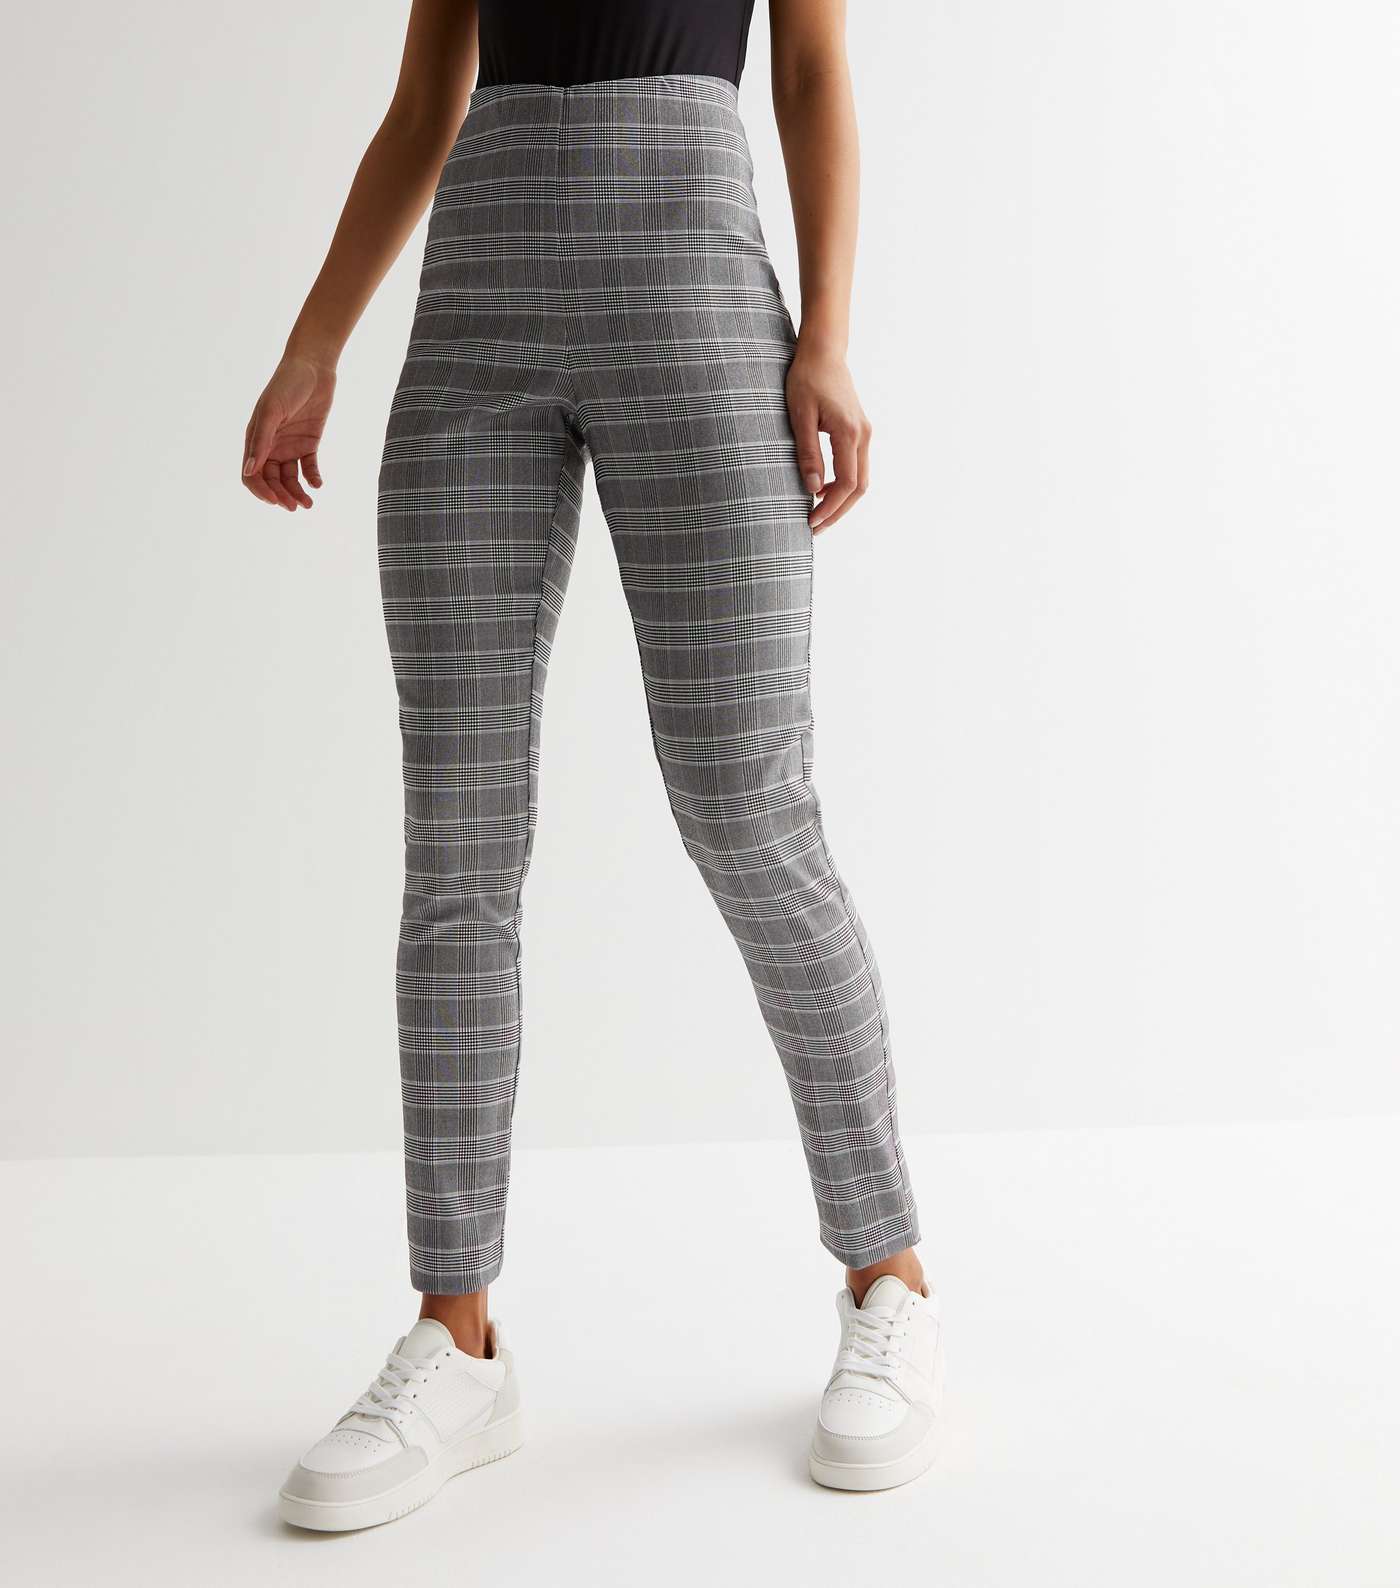 Tall Pale Grey Check High Waist Slim Stretch Trousers Image 2